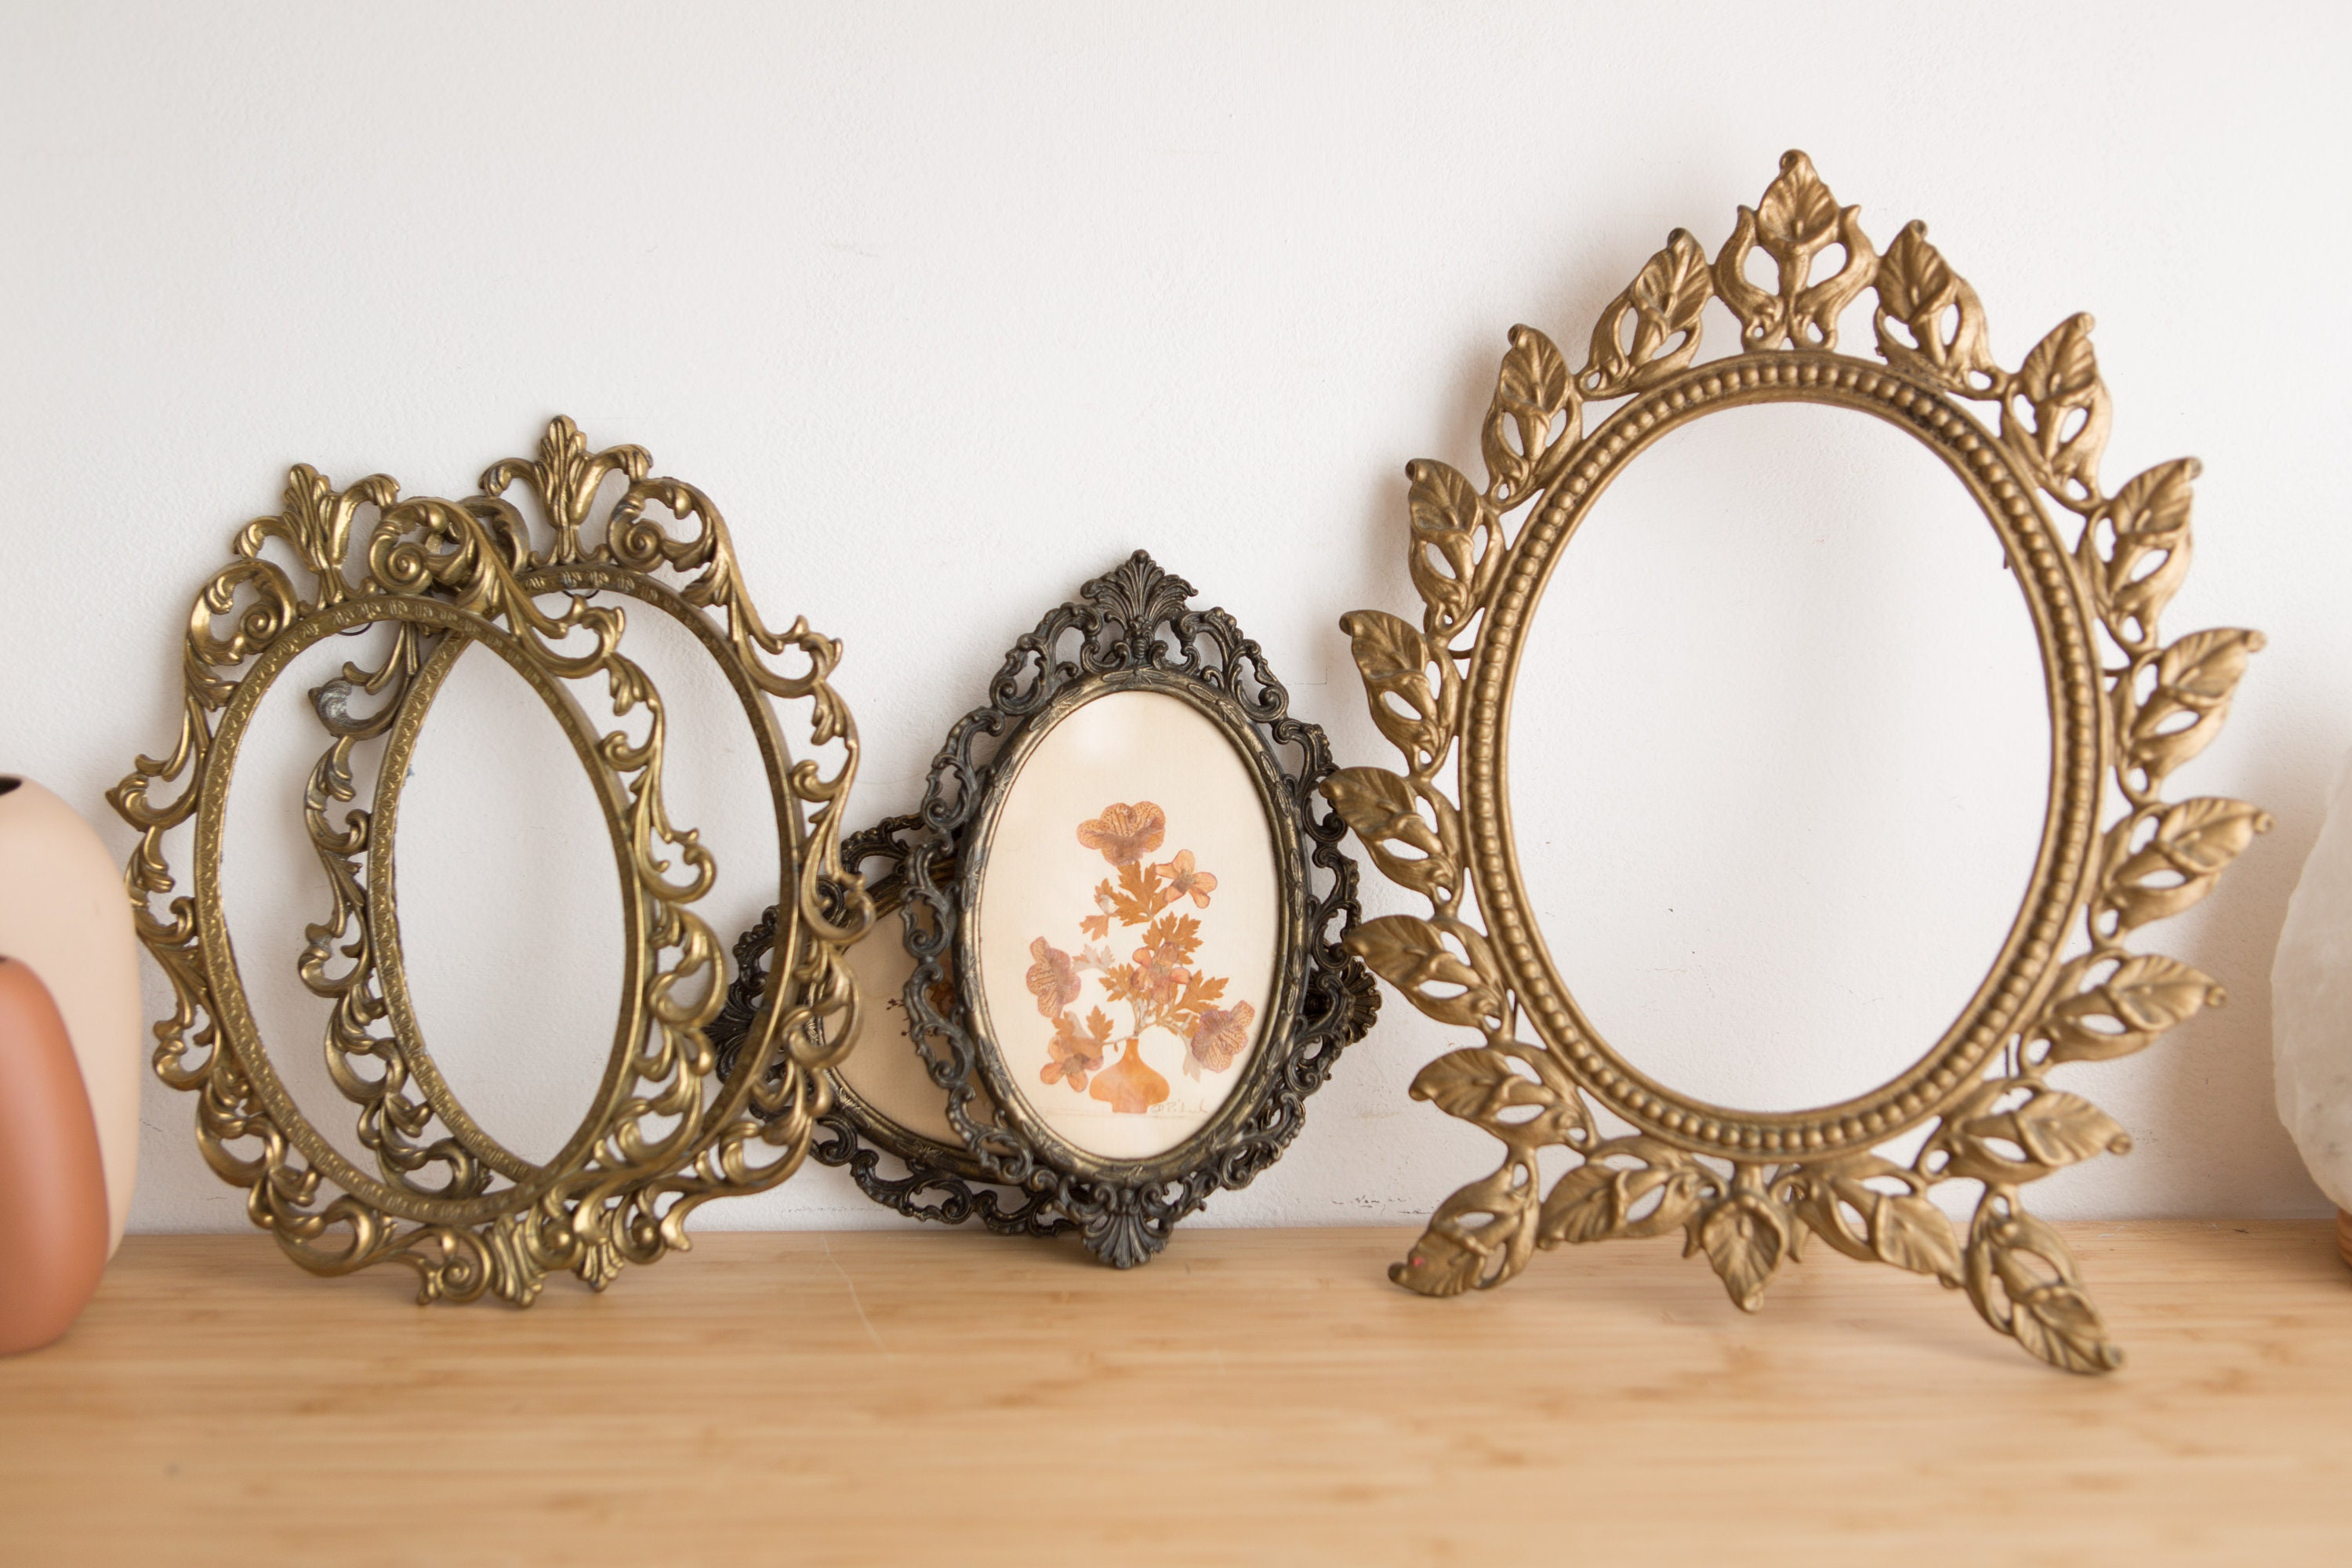 Vintage Oval Frames 5 Gold And Bronze Colored Small Metal Picture Frames